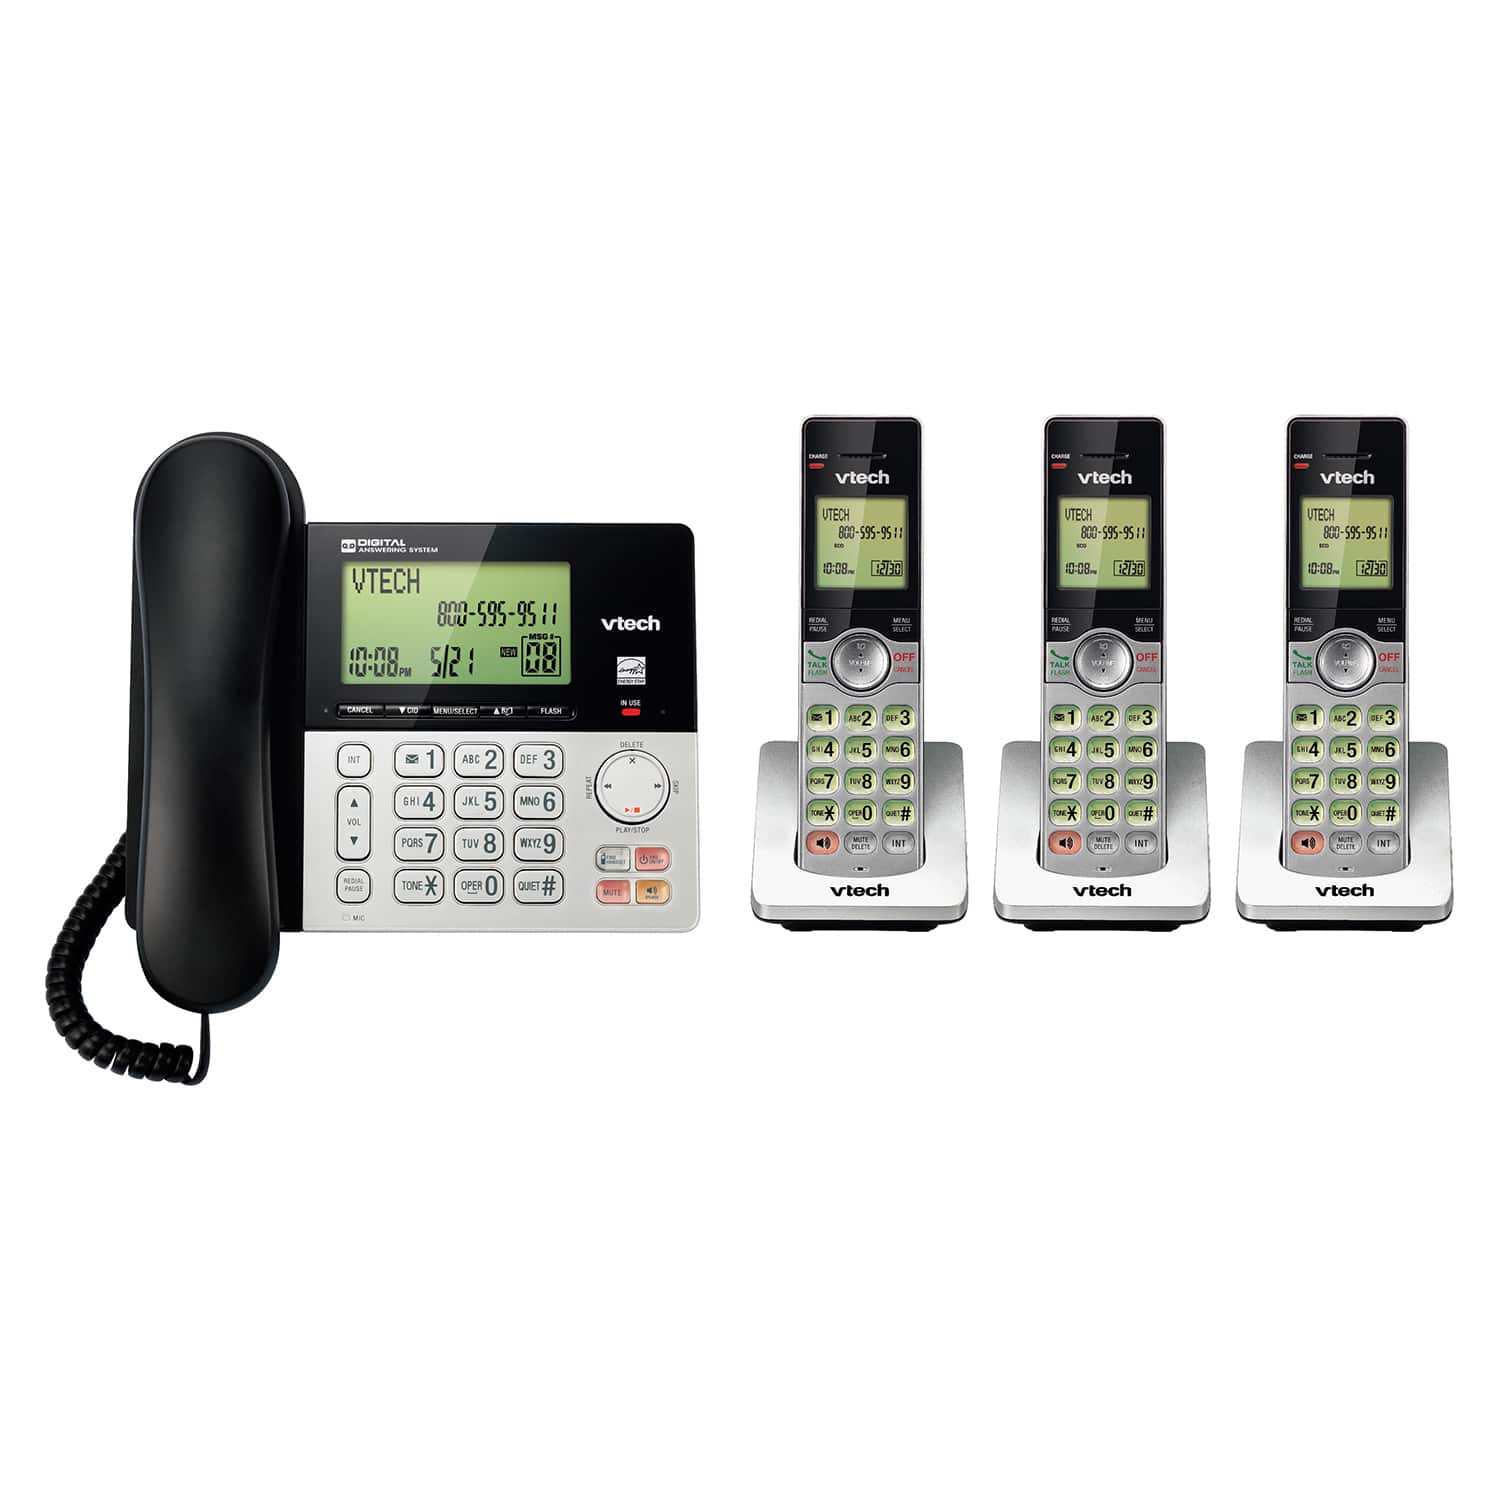 3 Handset Corded/Cordless Answering System with Caller ID/Call Waiting